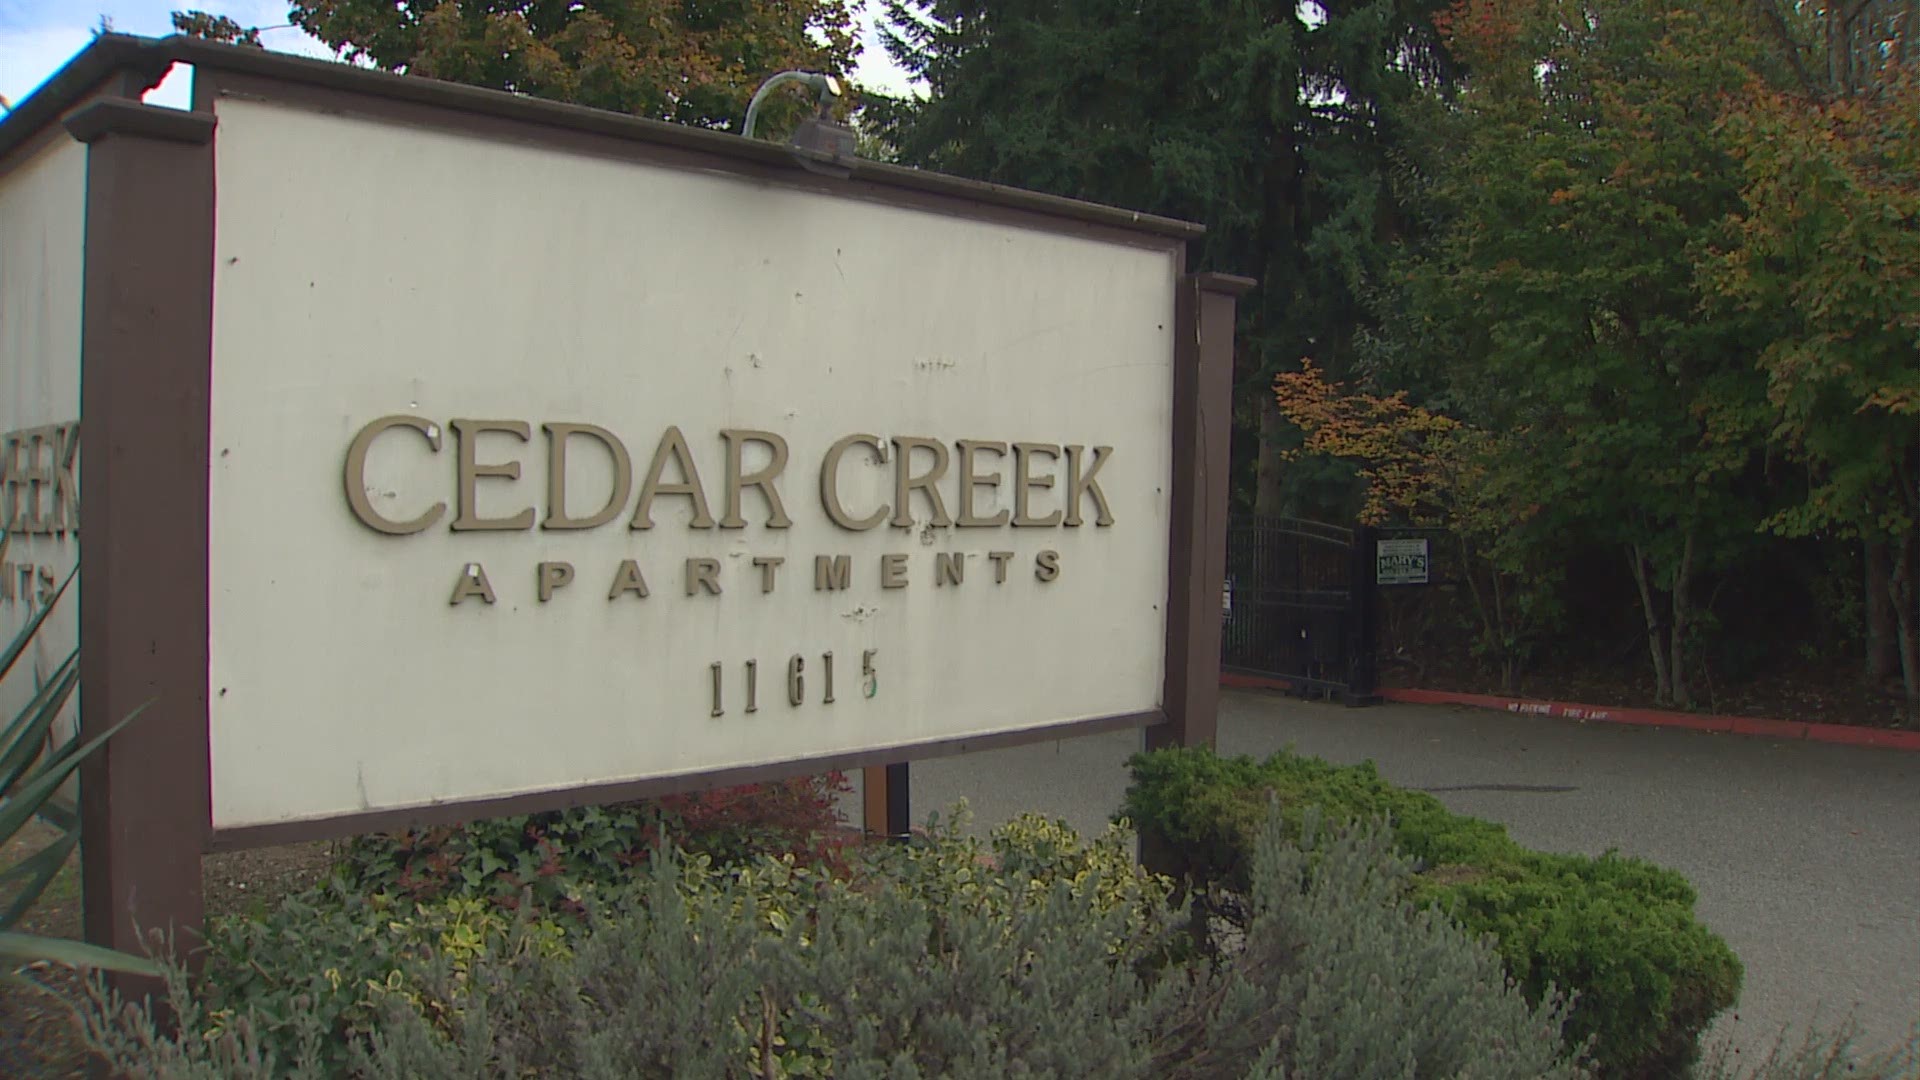 On Saturday morning, a person walking their dog called 911 after finding the 29-year-old victim's body near a parking lot at the Cedar Creek Apartments.